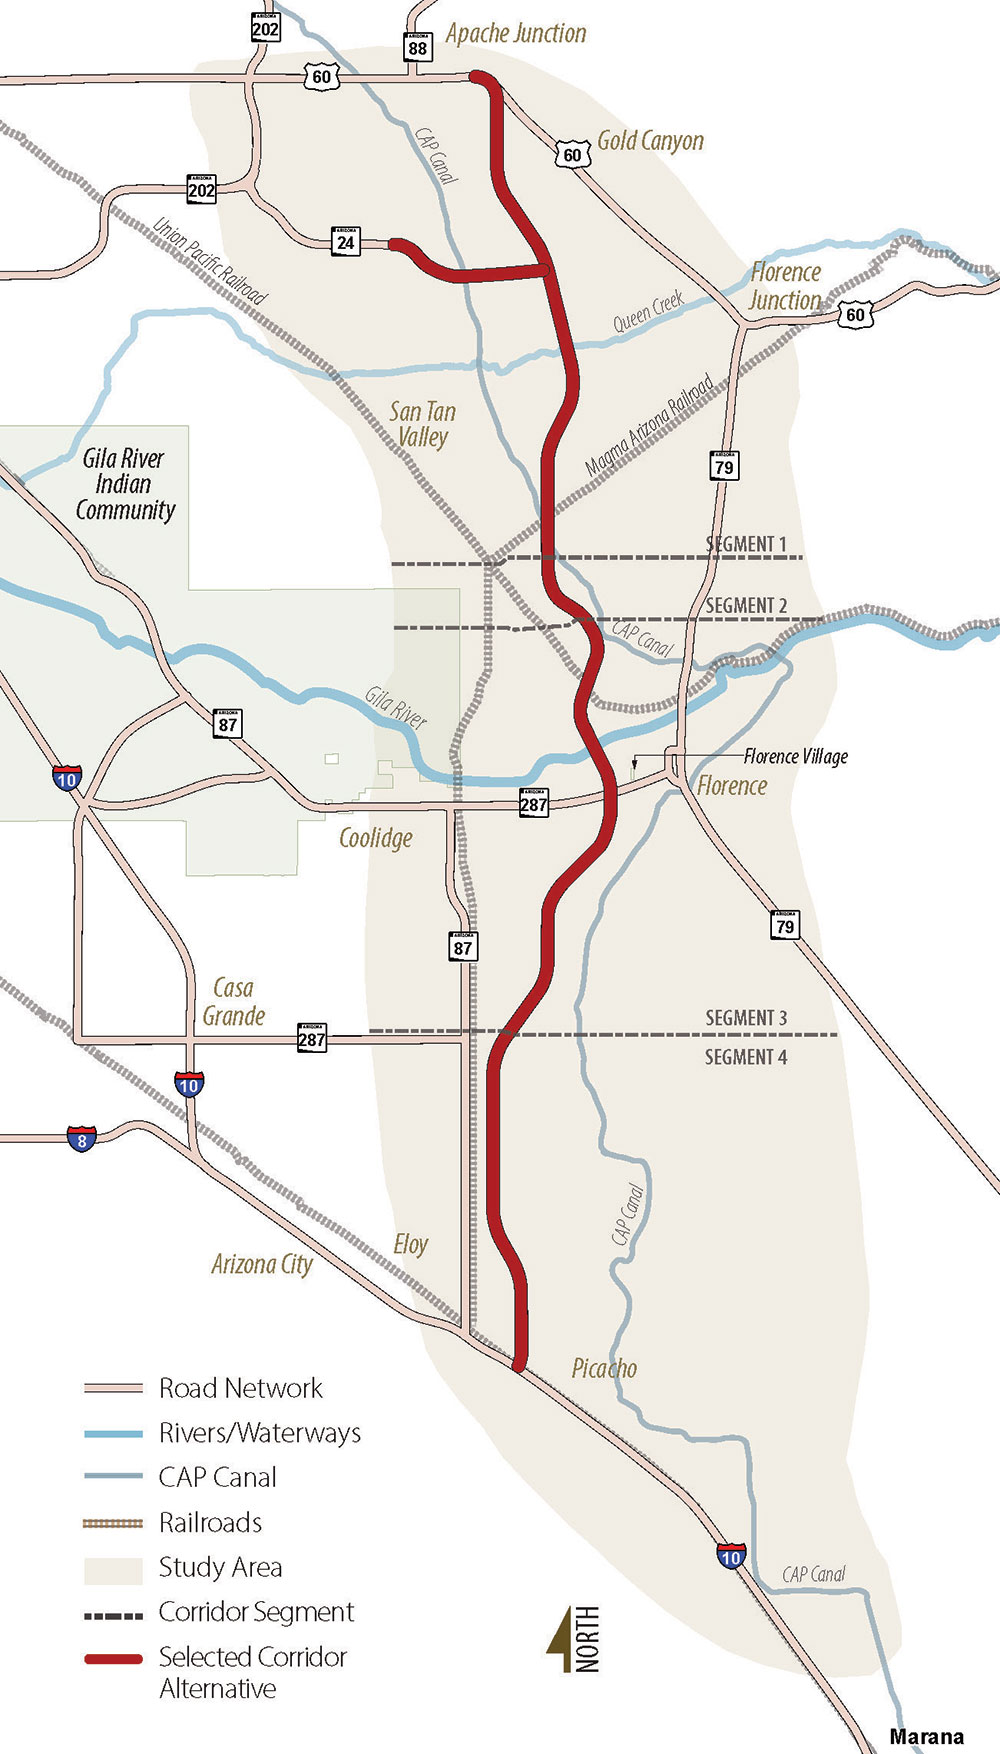 adot-selects-final-north-south-corridor-route-in-pinal-county-adot